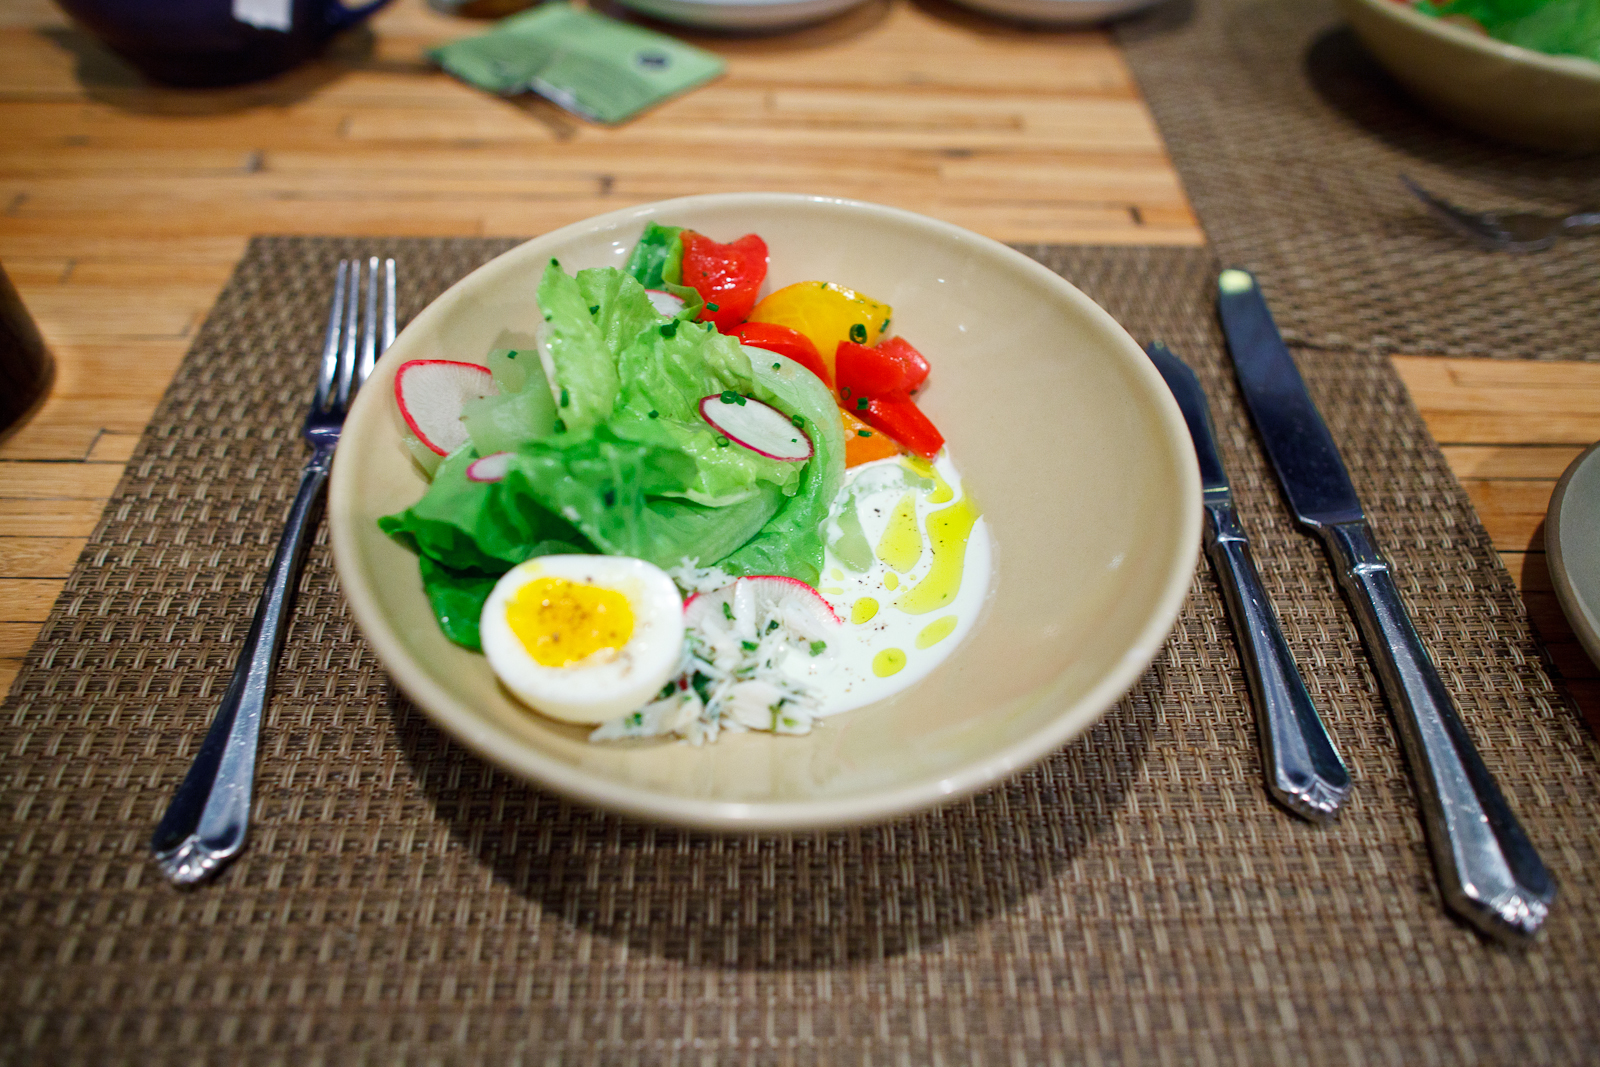 4th Course: Kurios Farms Bibb Lettuce with SC Blue Crab, Soft Boiled Egg, Heirloom Tomatoes, Shaved Radish and Cucumber Buttermilk